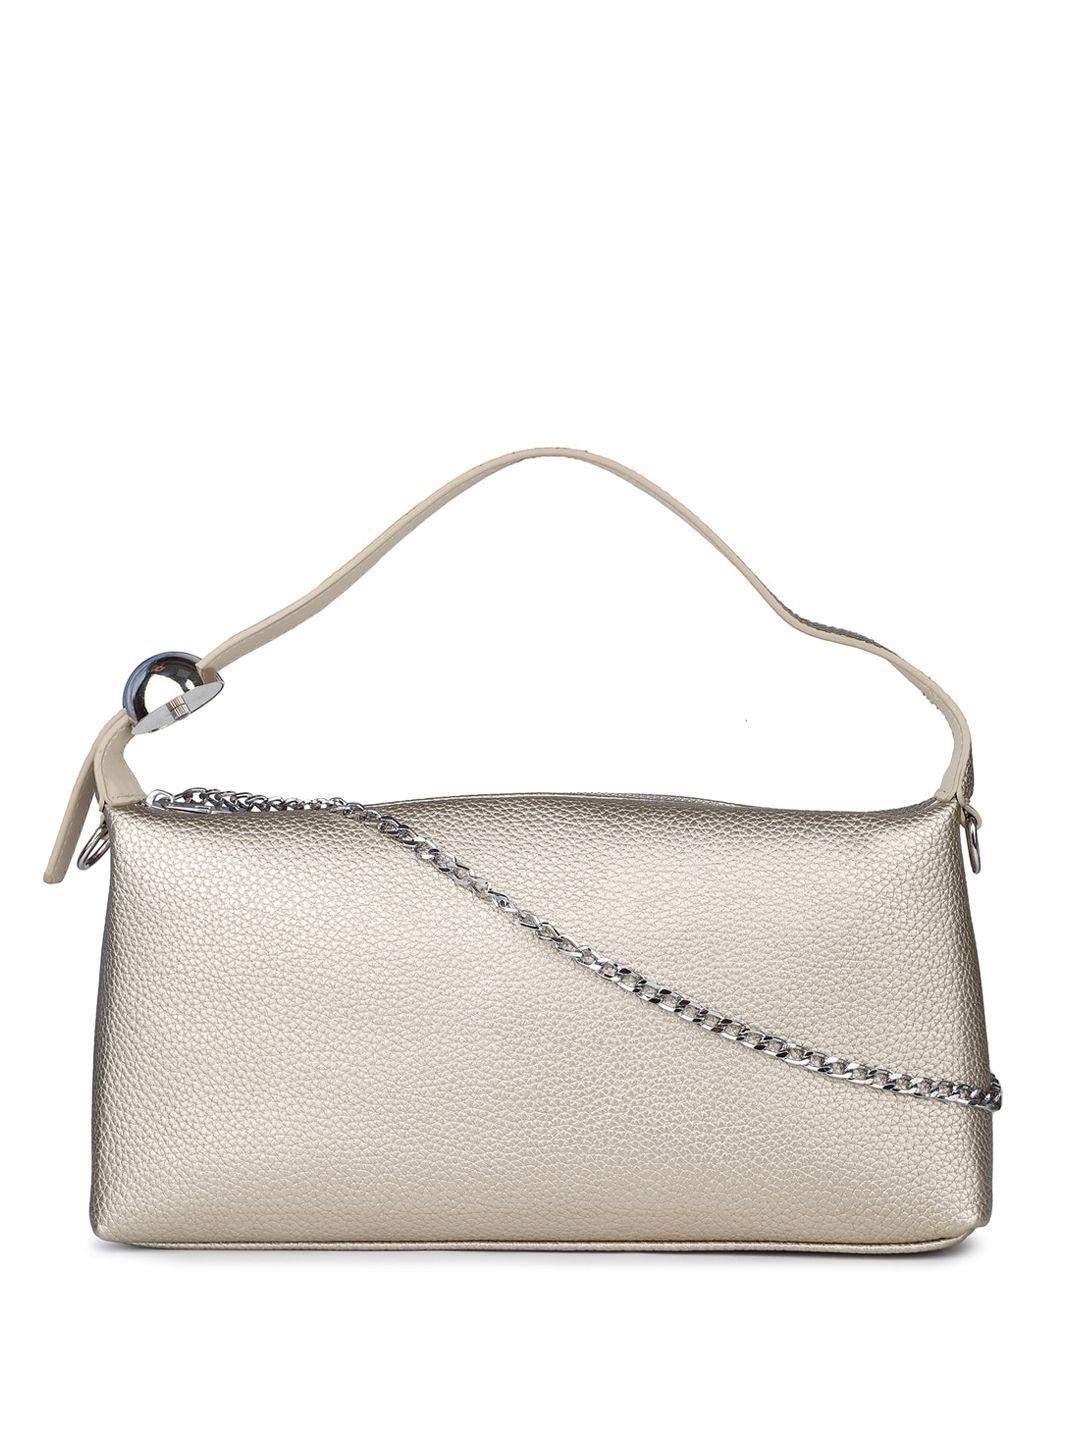 inc 5 textured synthetic leather structured handheld bag